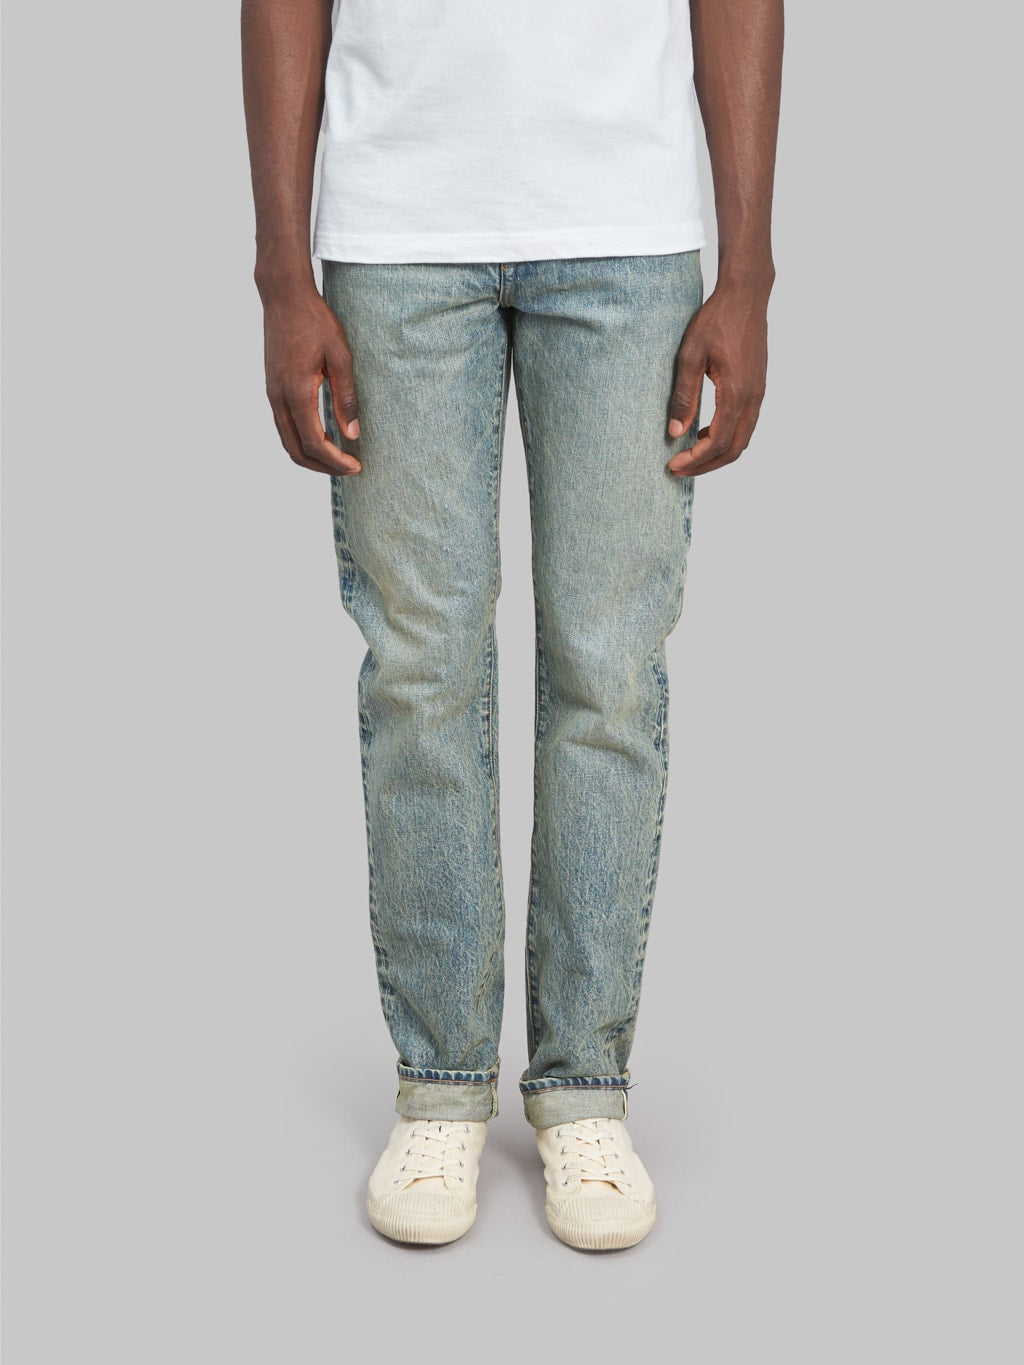 rogue territory strider light indigo wash selvedge jeans front